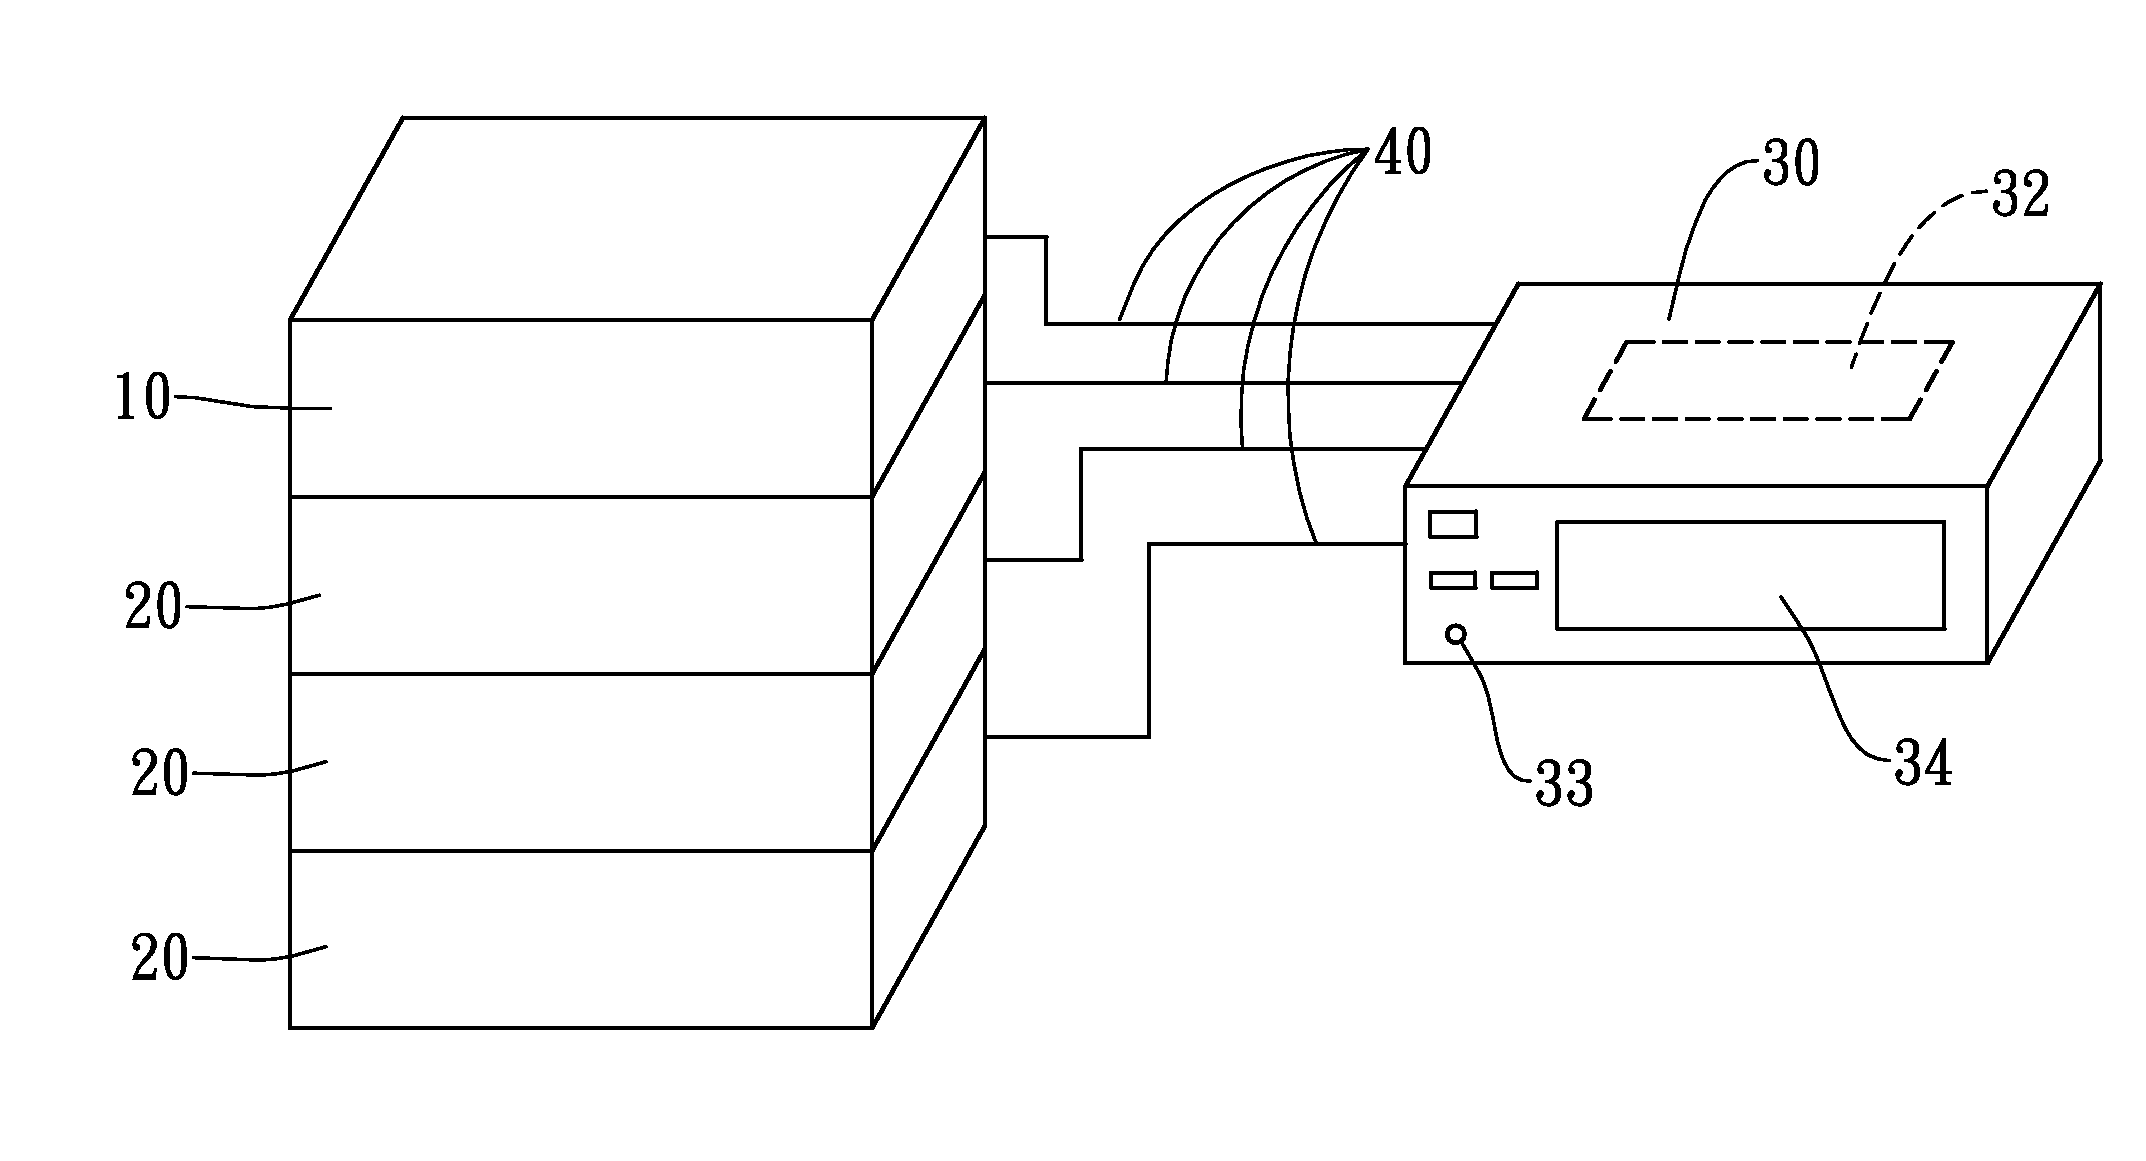 Optic disc copying device with voice output